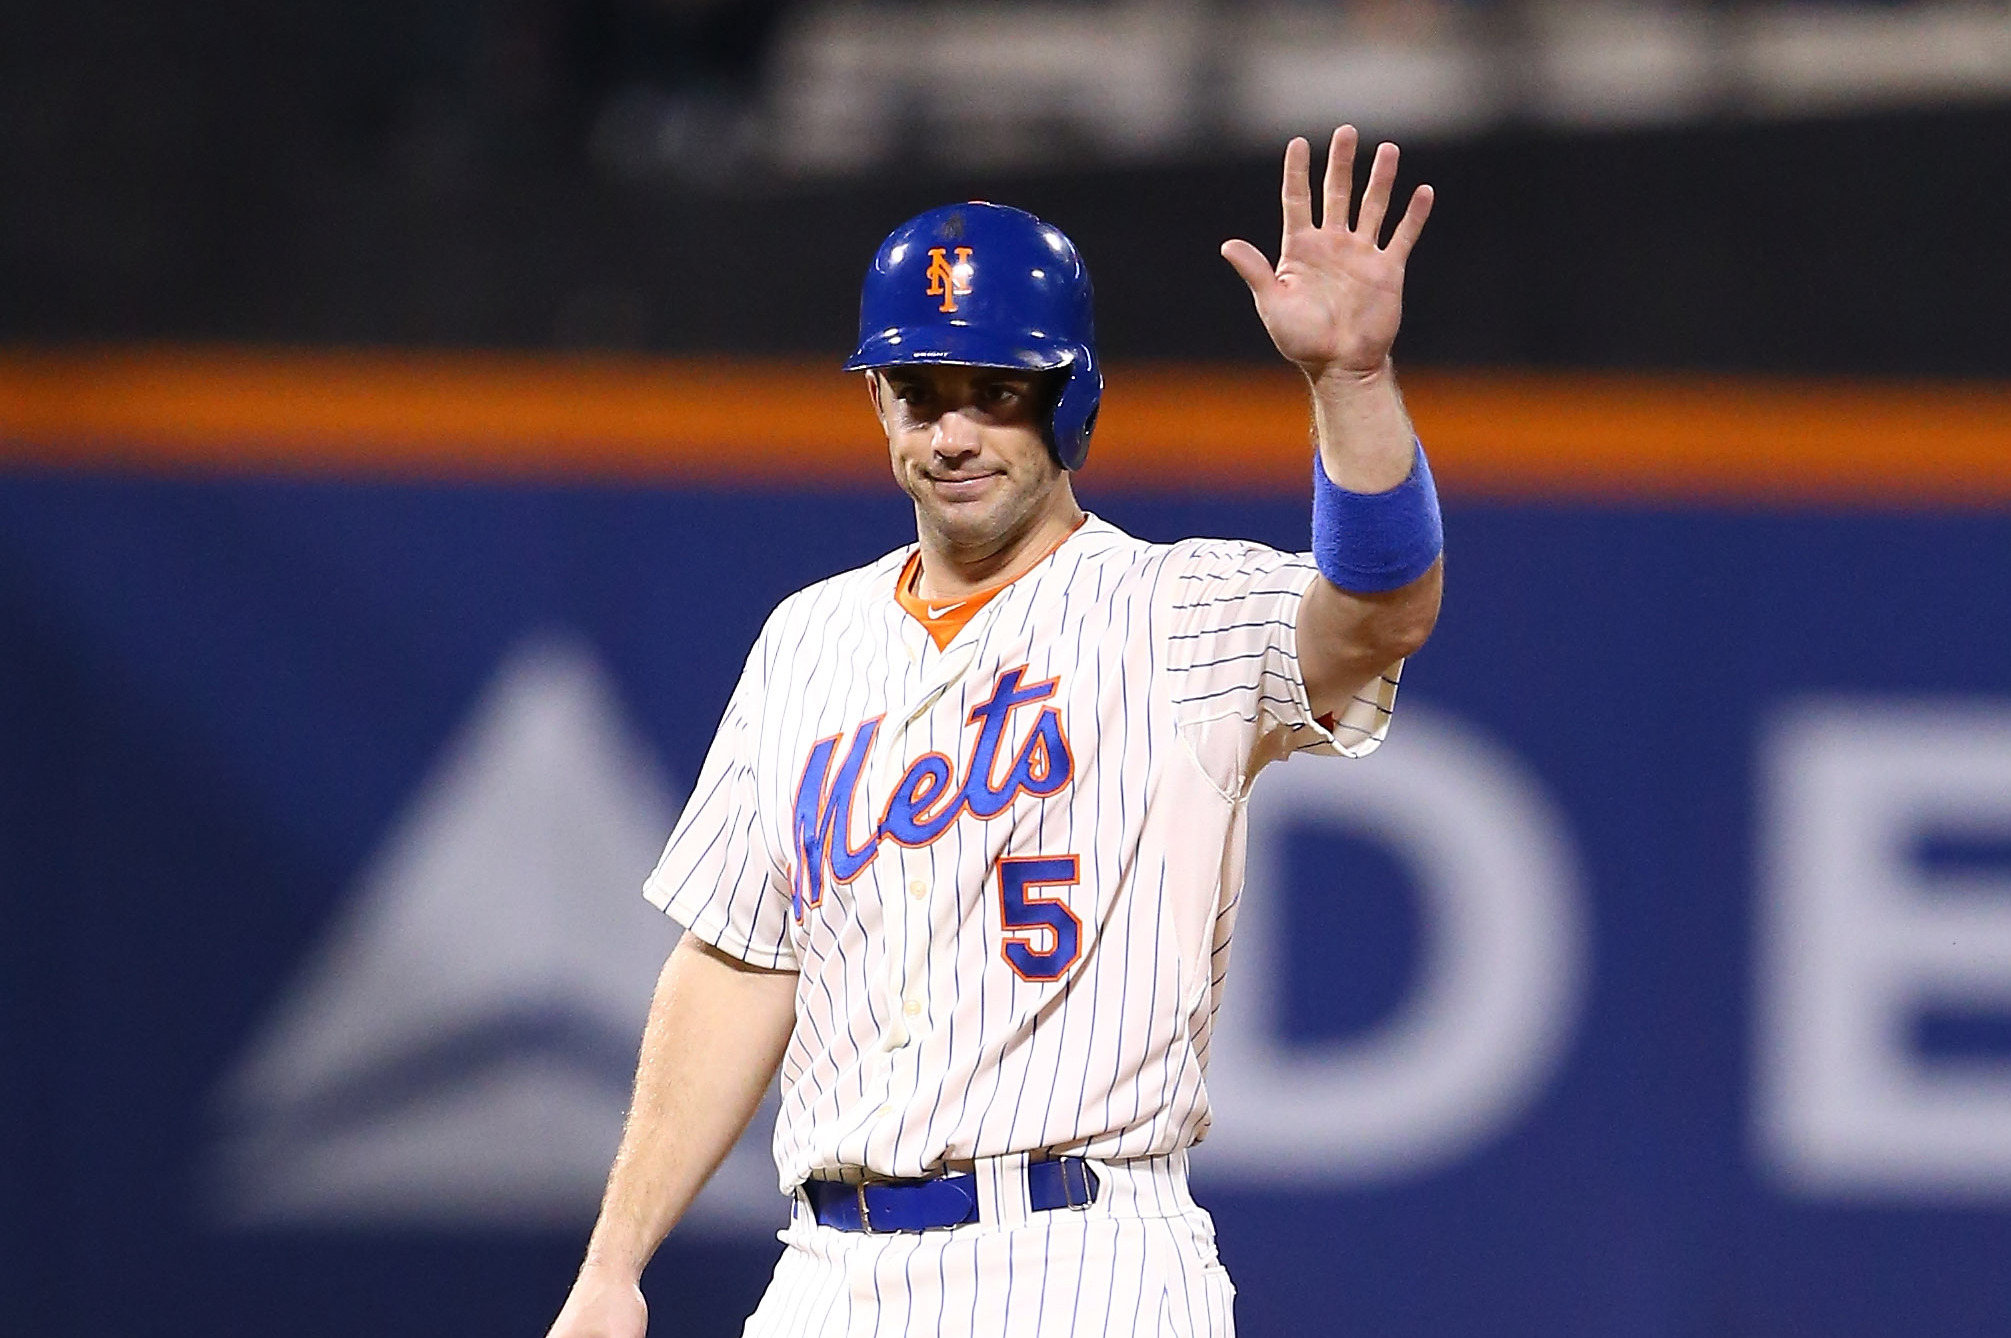 David Wright, greatest third baseman and position player in Mets